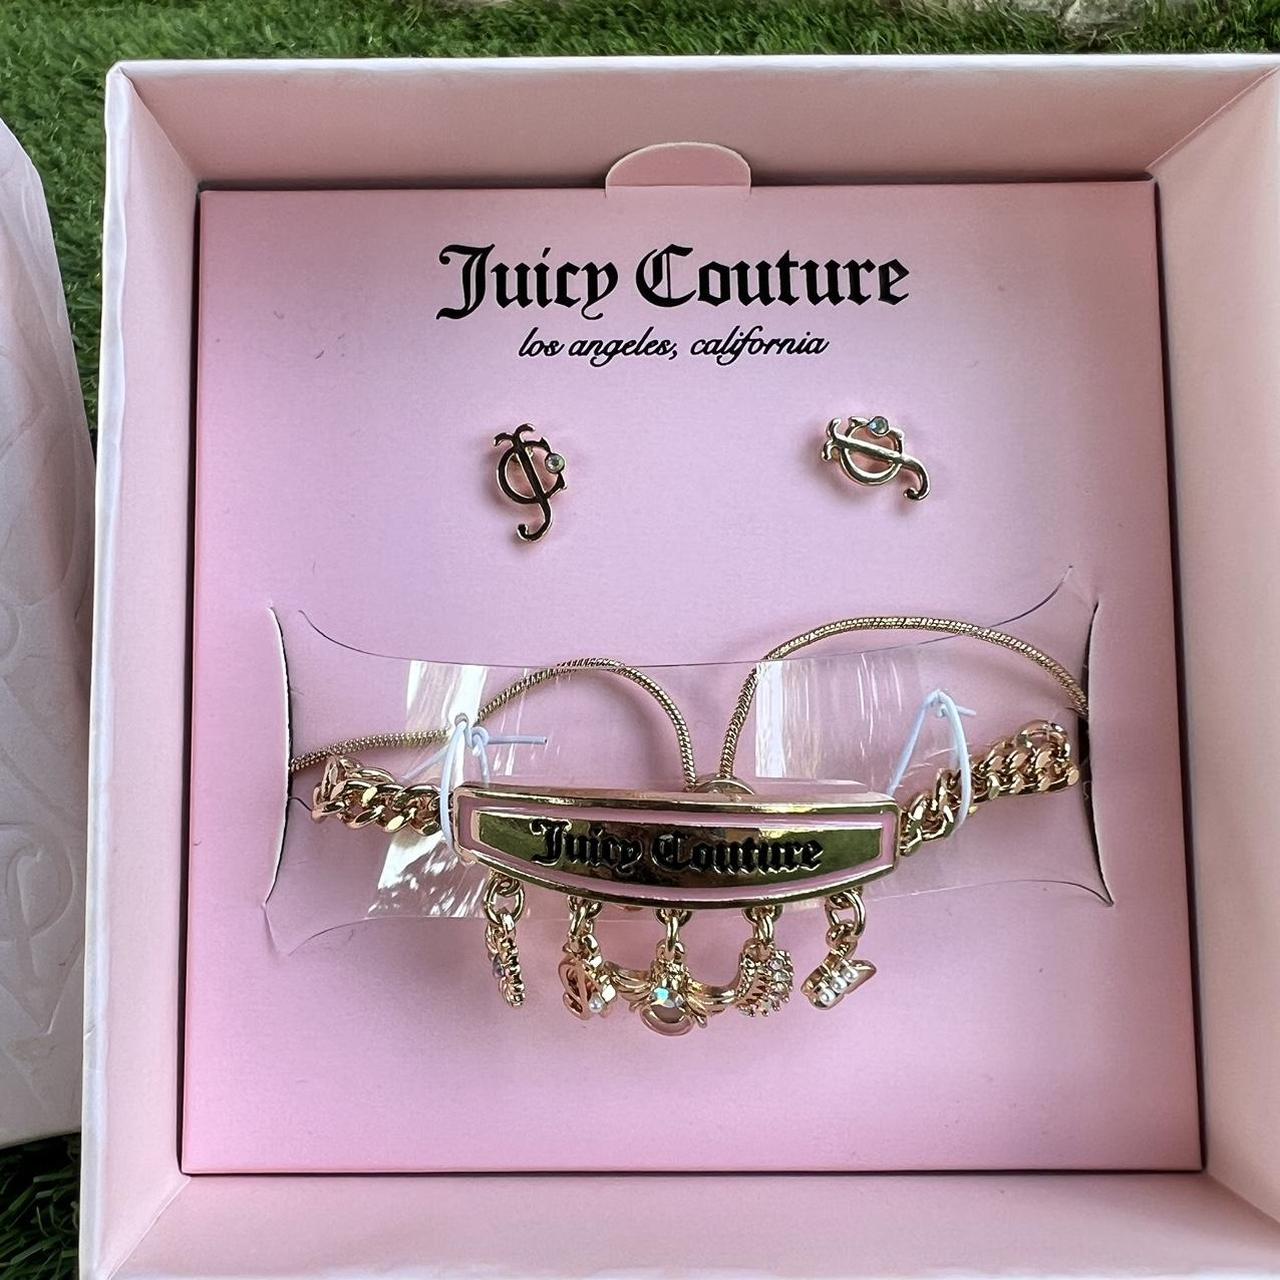 Juicy Couture Heart Charms Bracelet - Garden Party Collection